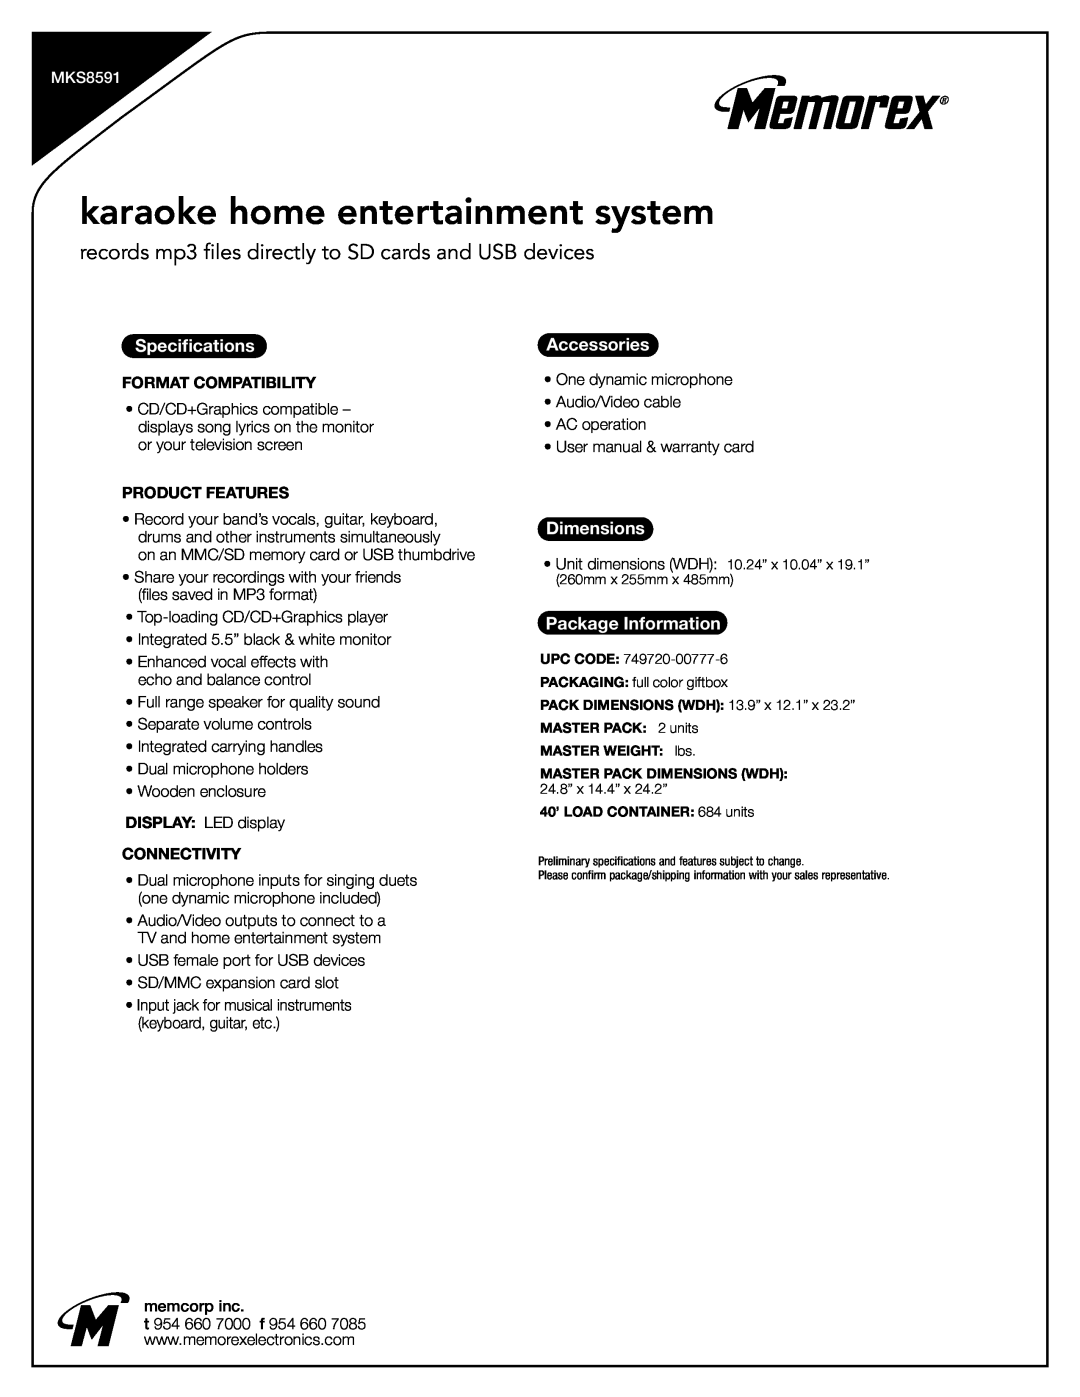 Memorex MKS8591 manual karaoke home entertainment system, Specifications, Accessories, Dimensions, Package Information 